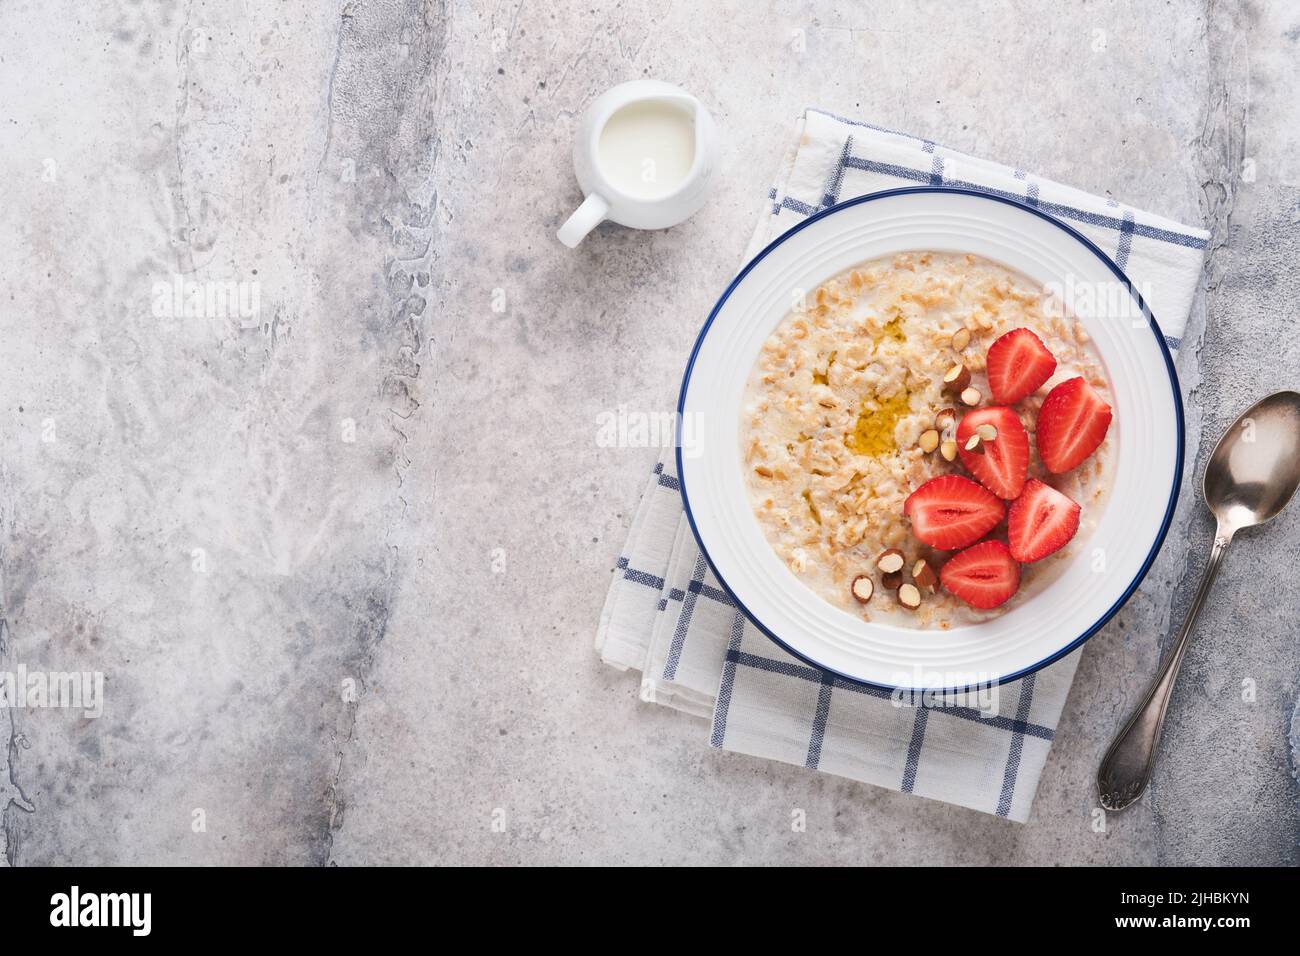 Oatmeal. Bowl of oatmeal porridge with strawberry, almond and milk on vintage light grey teal table. Top view in flat lay style. Natural ingredients. Stock Photo